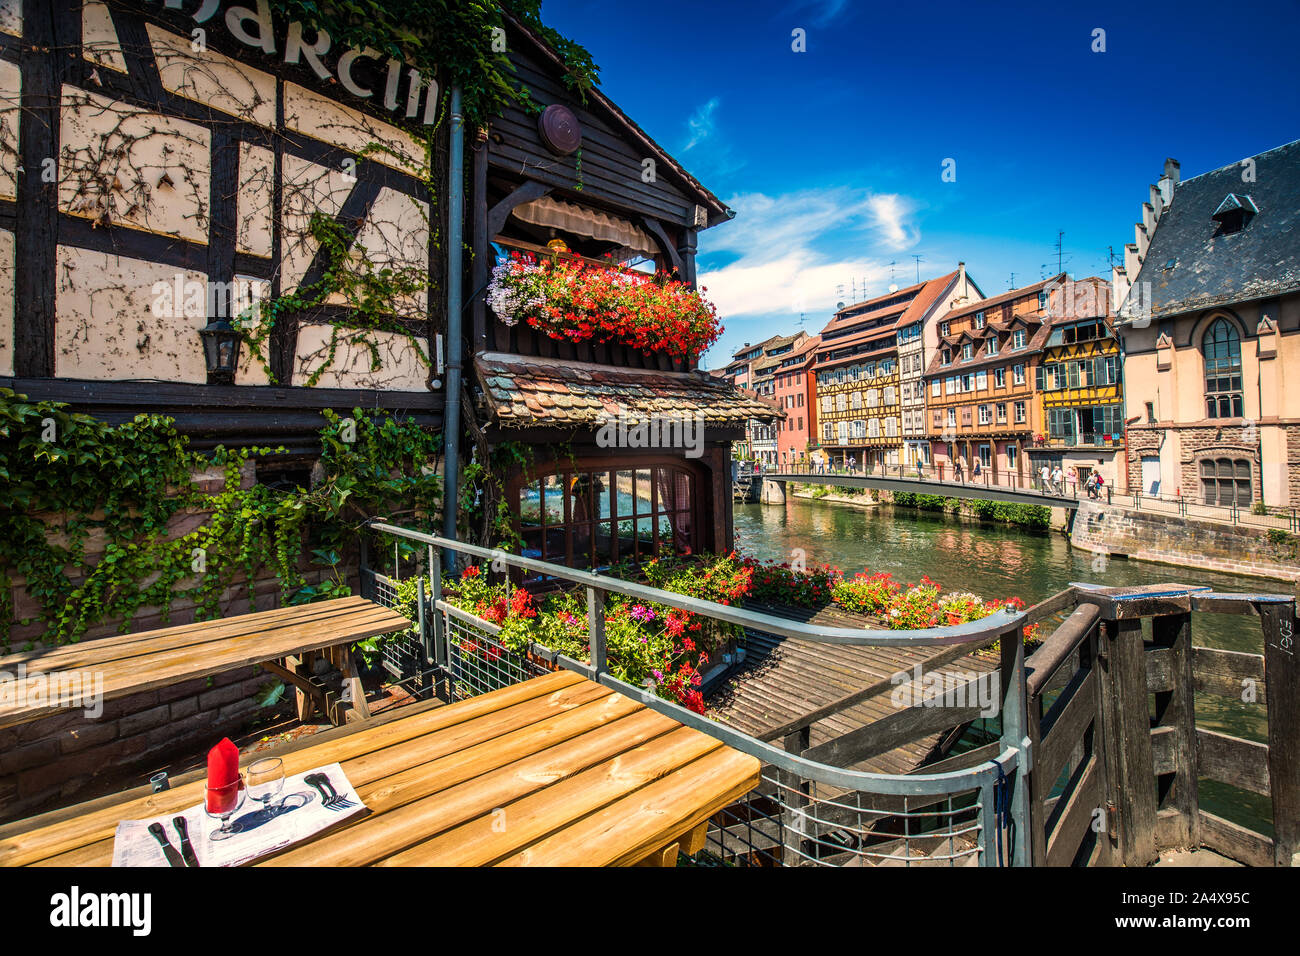 STRASBOURG, FRANCE - August 2019 - Old city center of Strasbourg town with colorful houses, Strasbourg, Alsace, France, Europe. Stock Photo